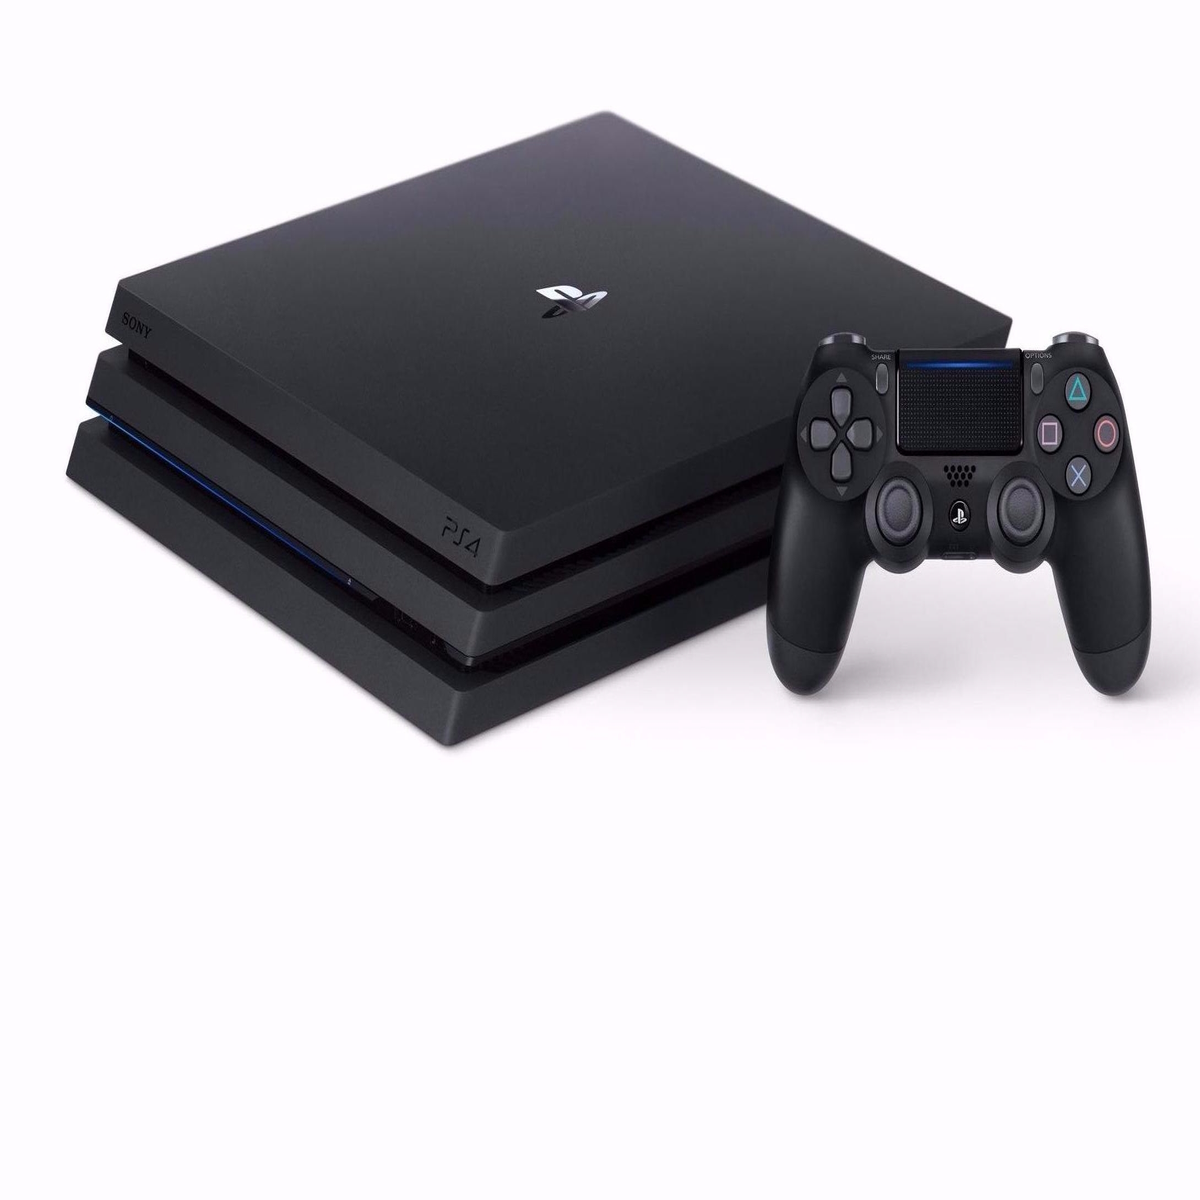 https://assetsio.reedpopcdn.com/digitalfoundry-2016-playstation-4-pro-review-1478521655939.jpg?width=1200&height=1200&fit=crop&quality=100&format=png&enable=upscale&auto=webp